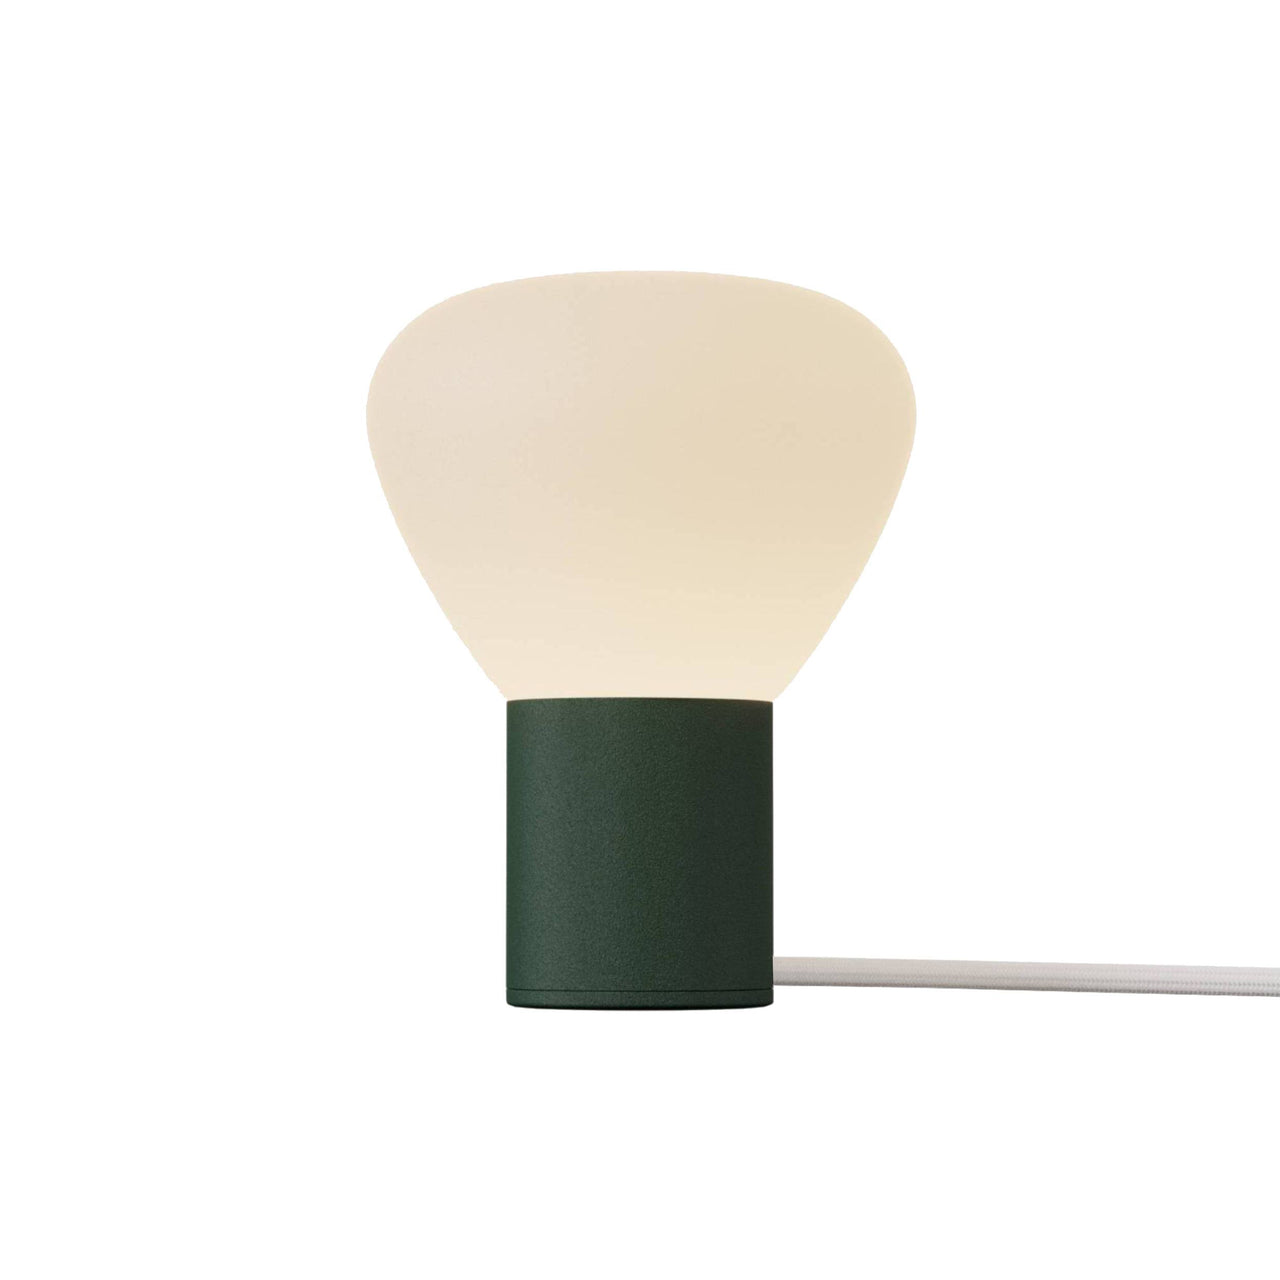 Parc 01 Table Lamp: Handswitch +  Green + White